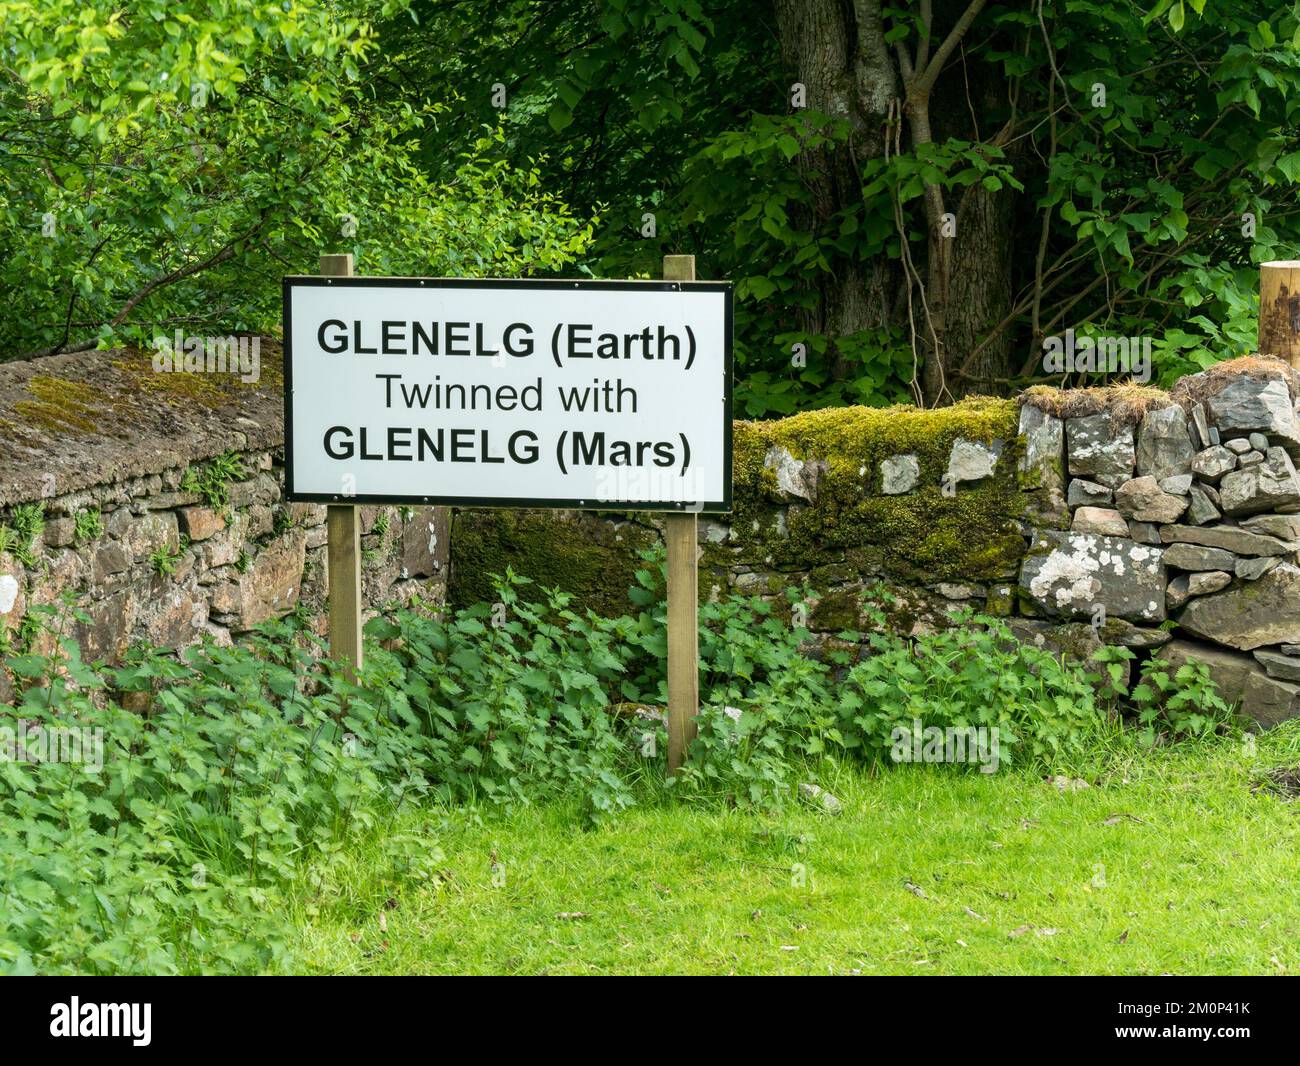 Humorous twinning sign between Glenelg village in Scotland and Glenelg on Mars, in recognition of NASA's 'Curiosity' rover visiting there in Oct 2012. Stock Photo